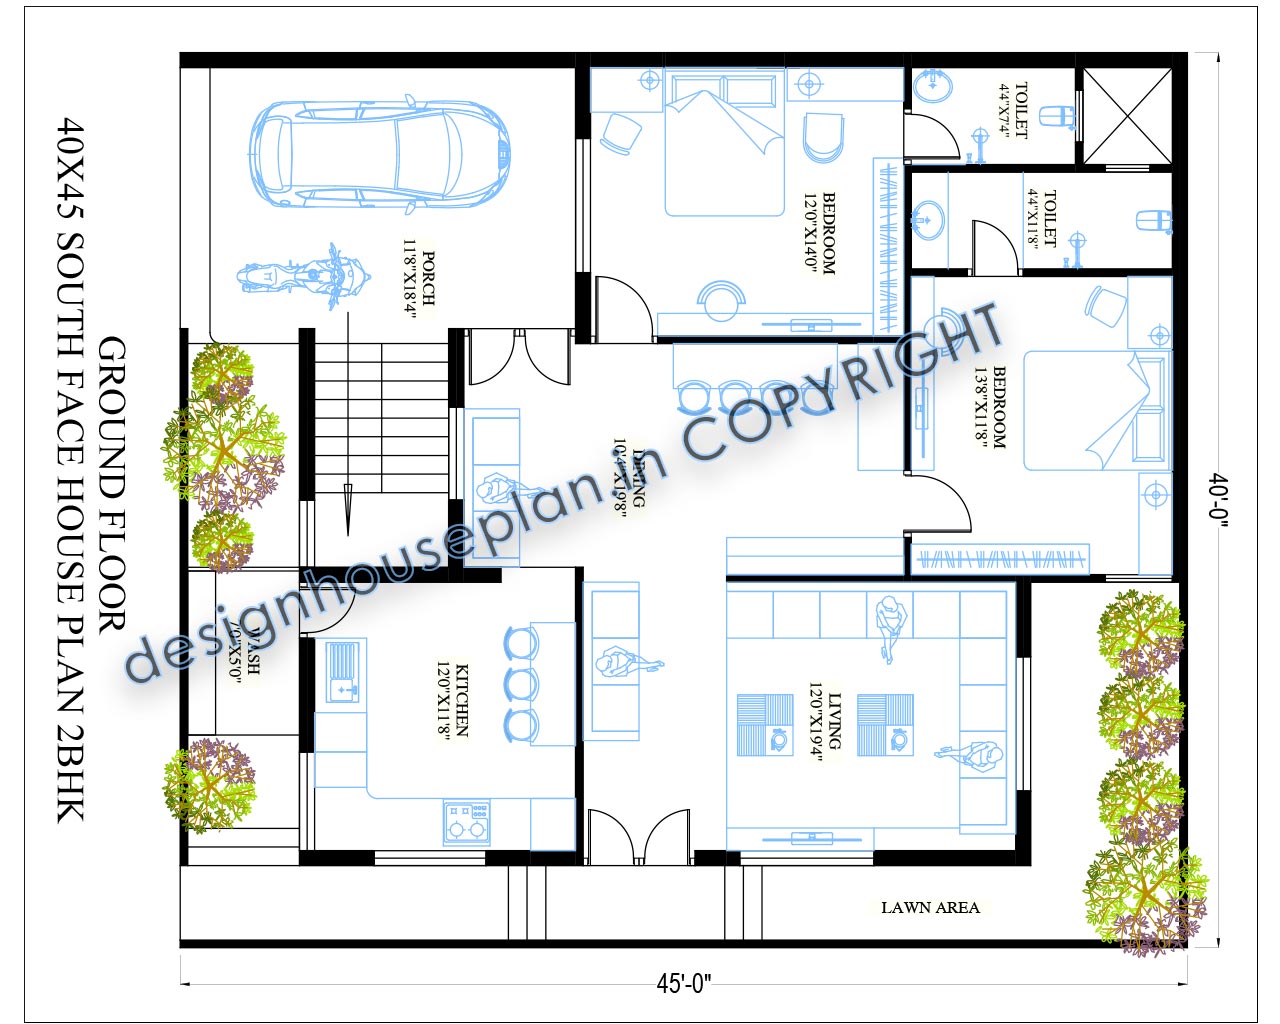 This is a 40x45 house plans with 2 bedrooms and a parking area and this is a south facing house map.